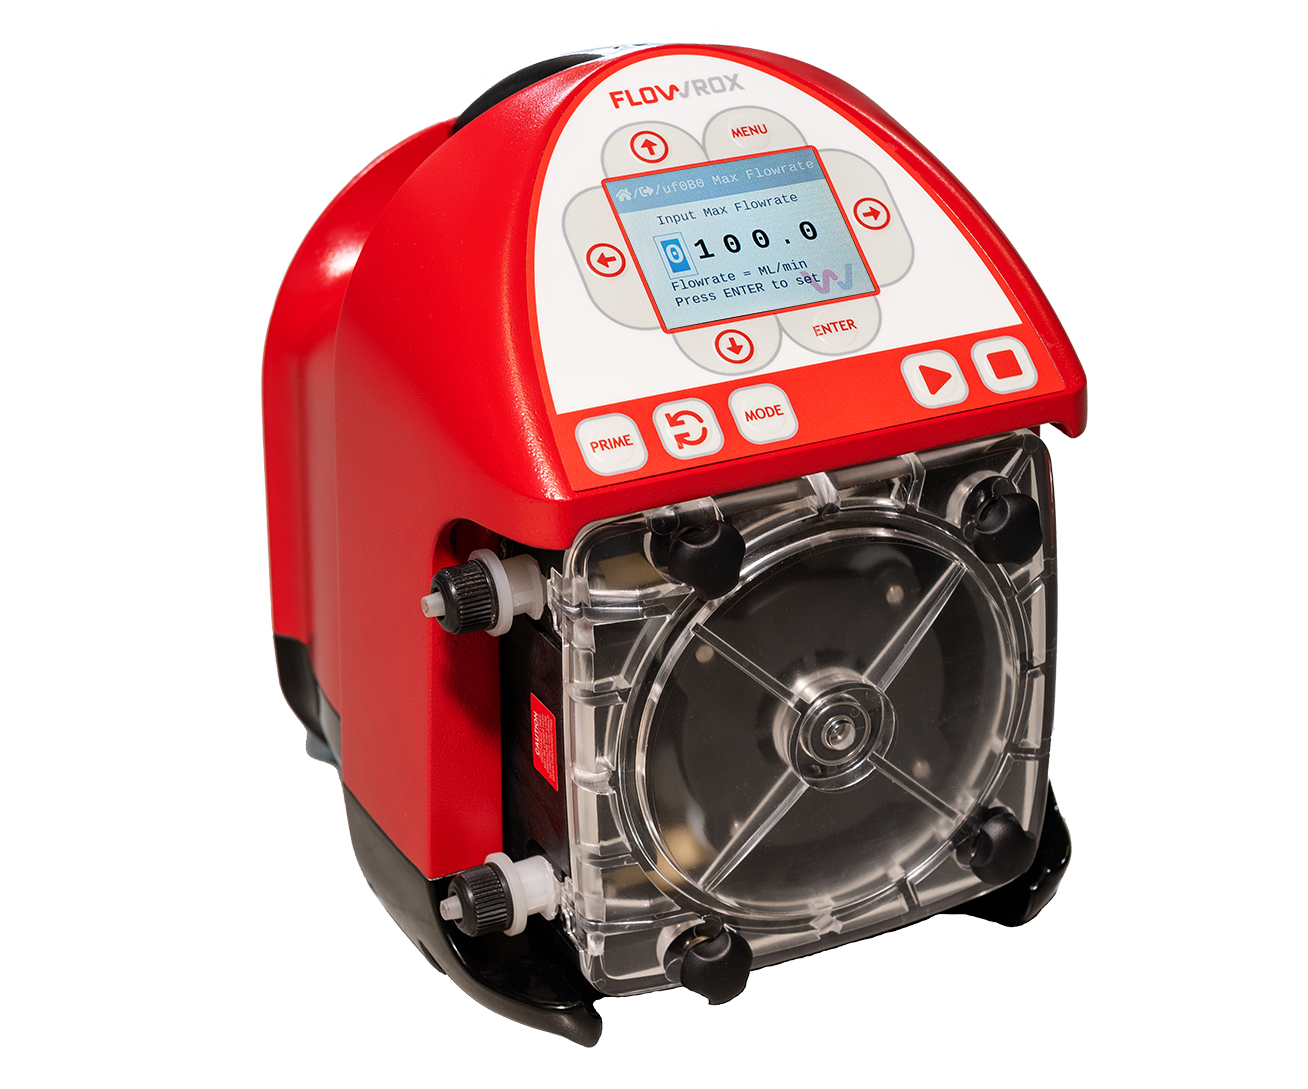 Every Flowrox FXM pump is now IIoT ready and users have the option to use the Flowrox Malibu portal.